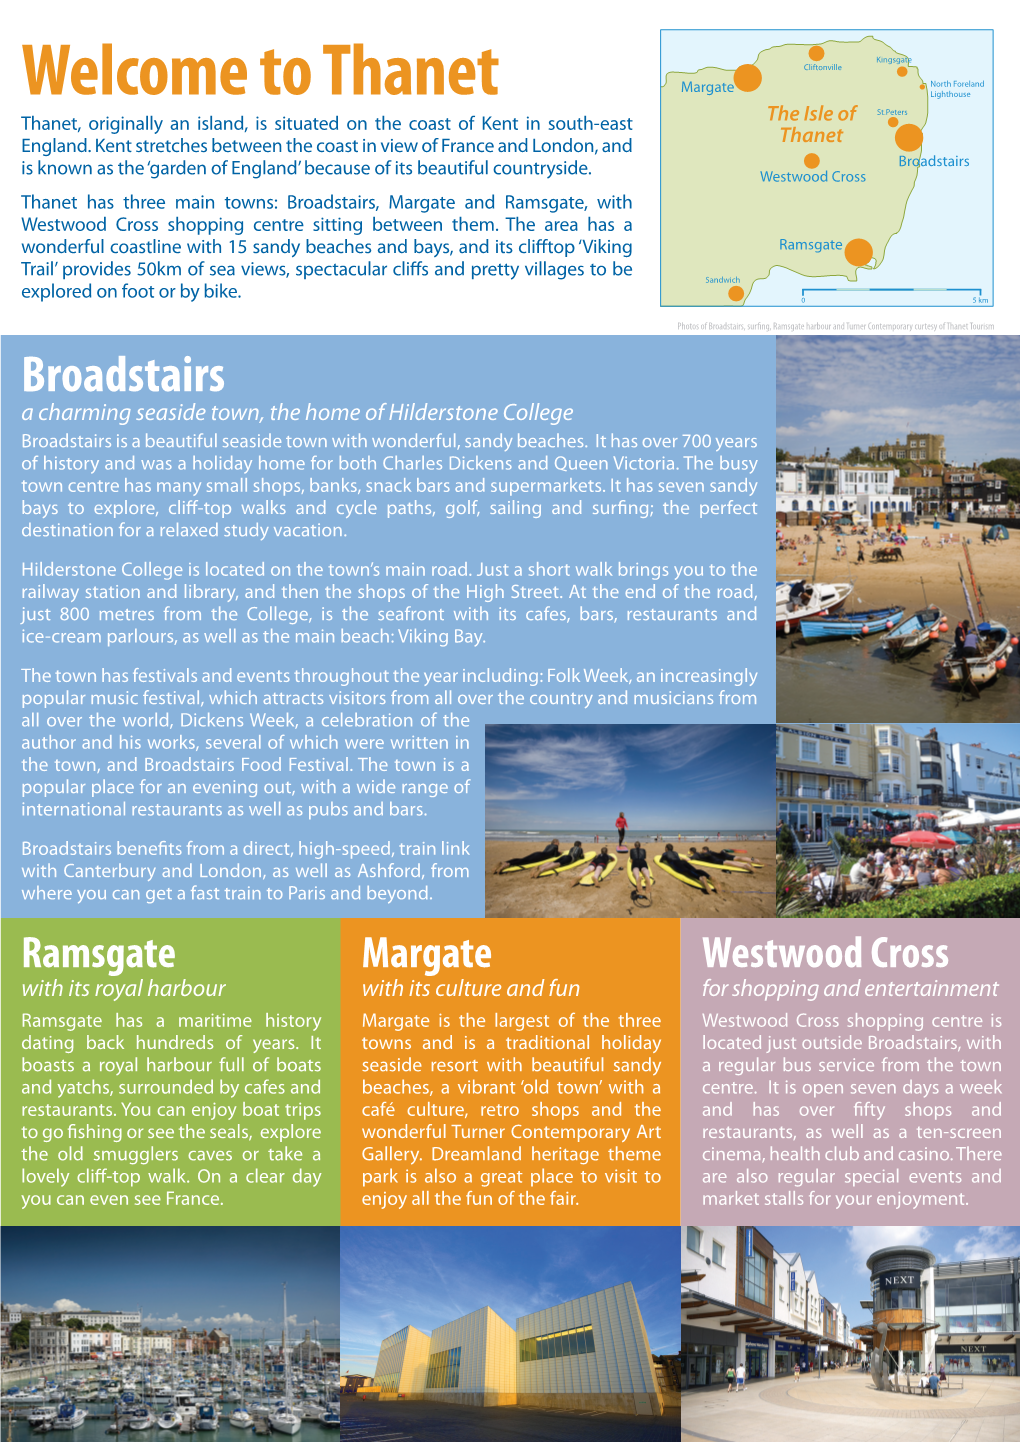 An Introduction to Broadstairs and Thanet